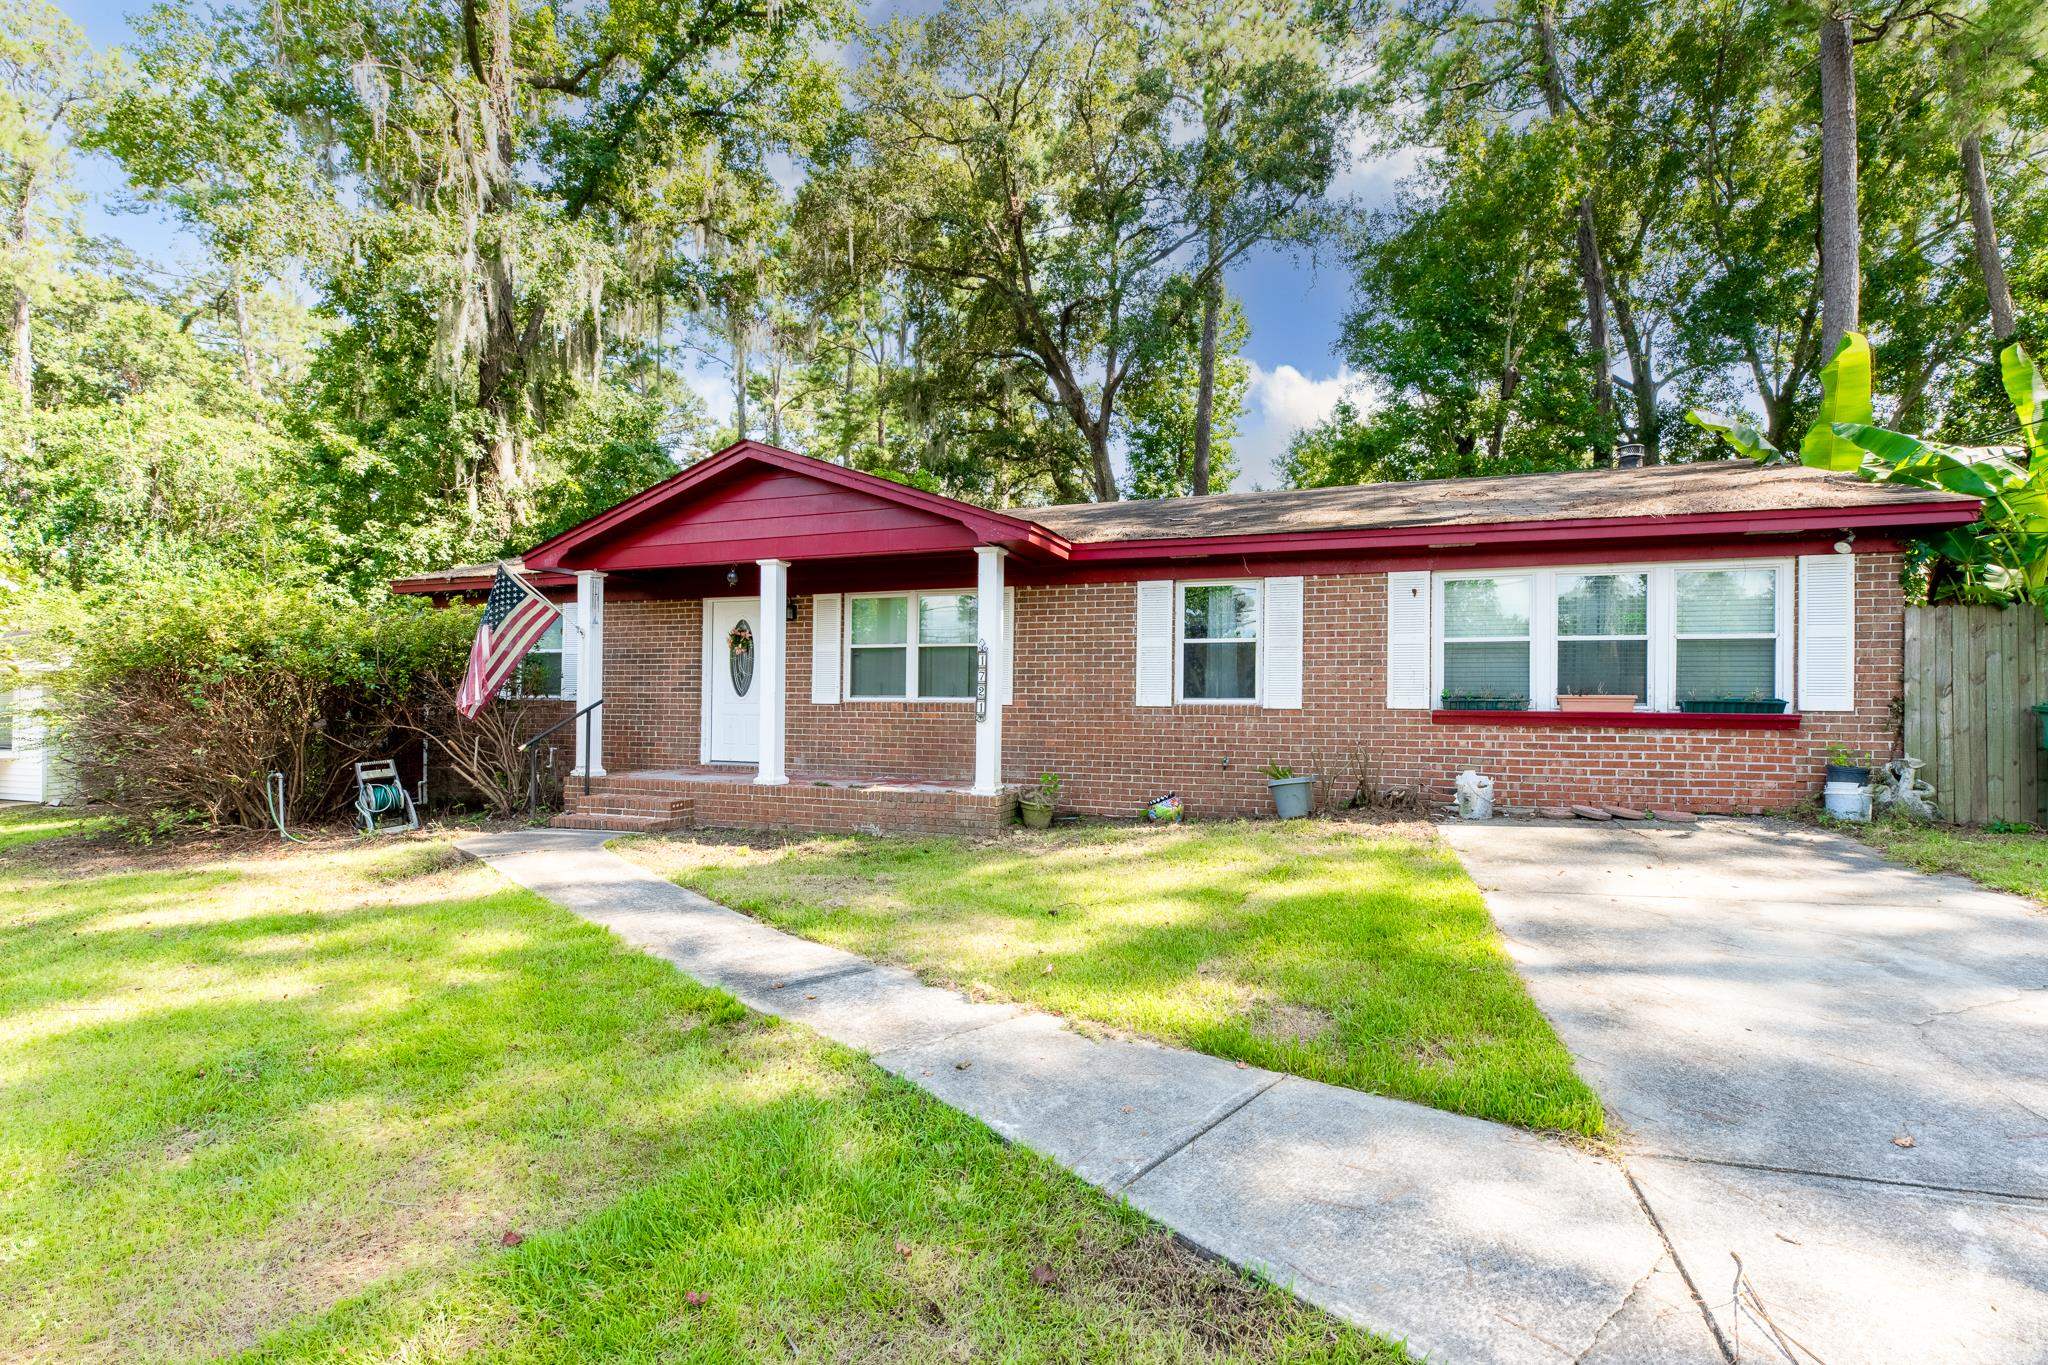 1721 Talpeco Road,TALLAHASSEE,Florida 32303,3 Bedrooms Bedrooms,1 BathroomBathrooms,Detached single family,1721 Talpeco Road,365370